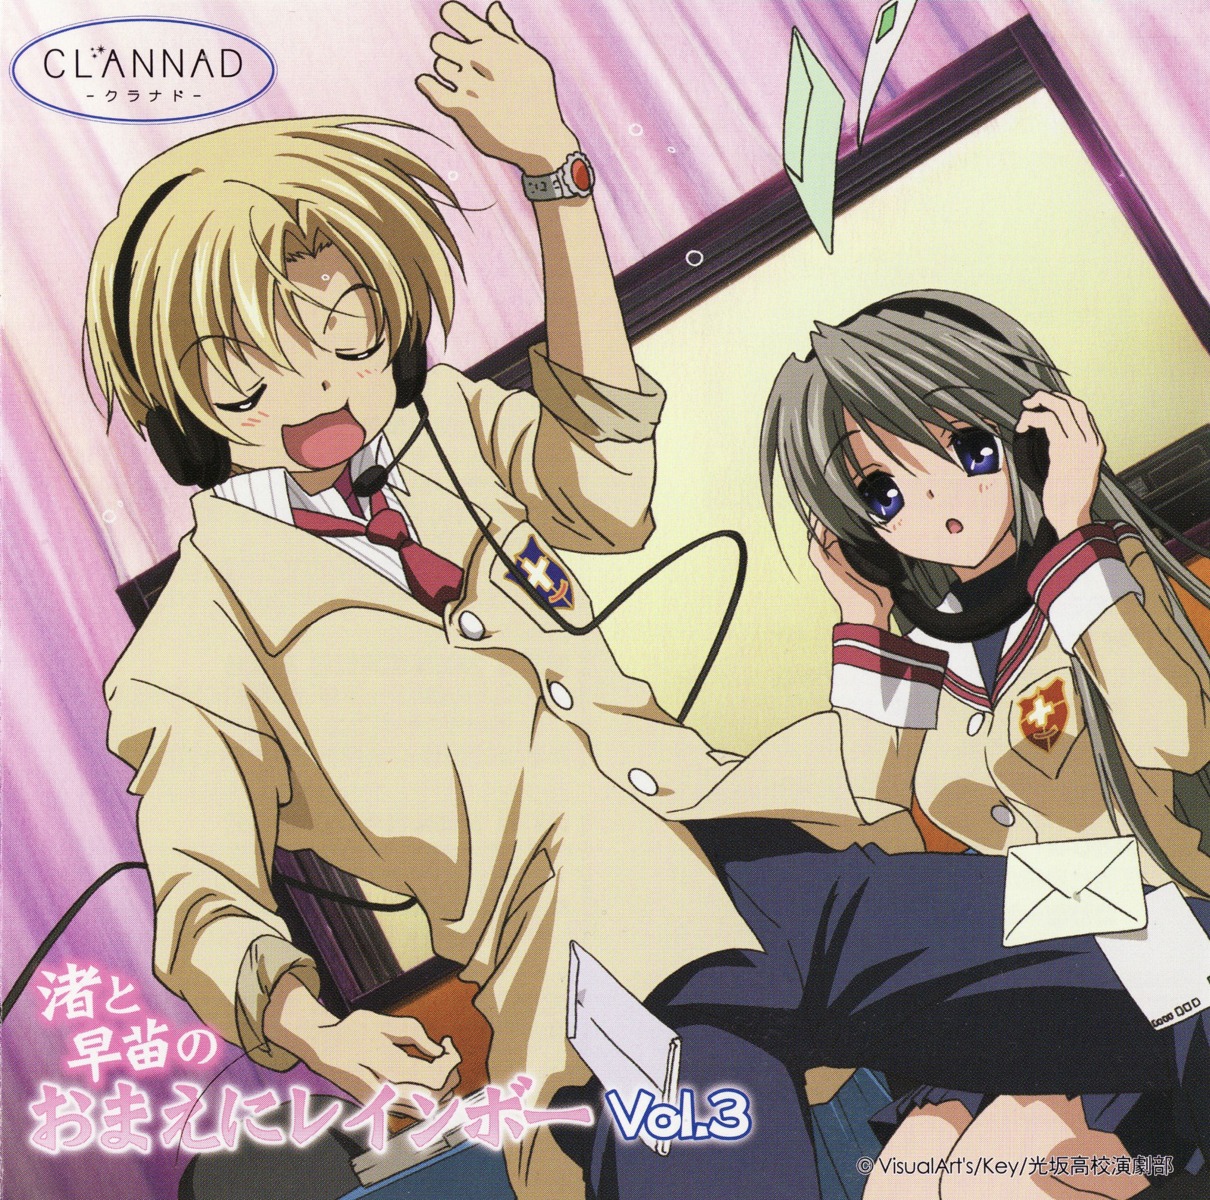 Clannad ~After Story~ - Sakagami Tomoyo - Sunohara Youhei - Clear File  (Kyoto Animation)